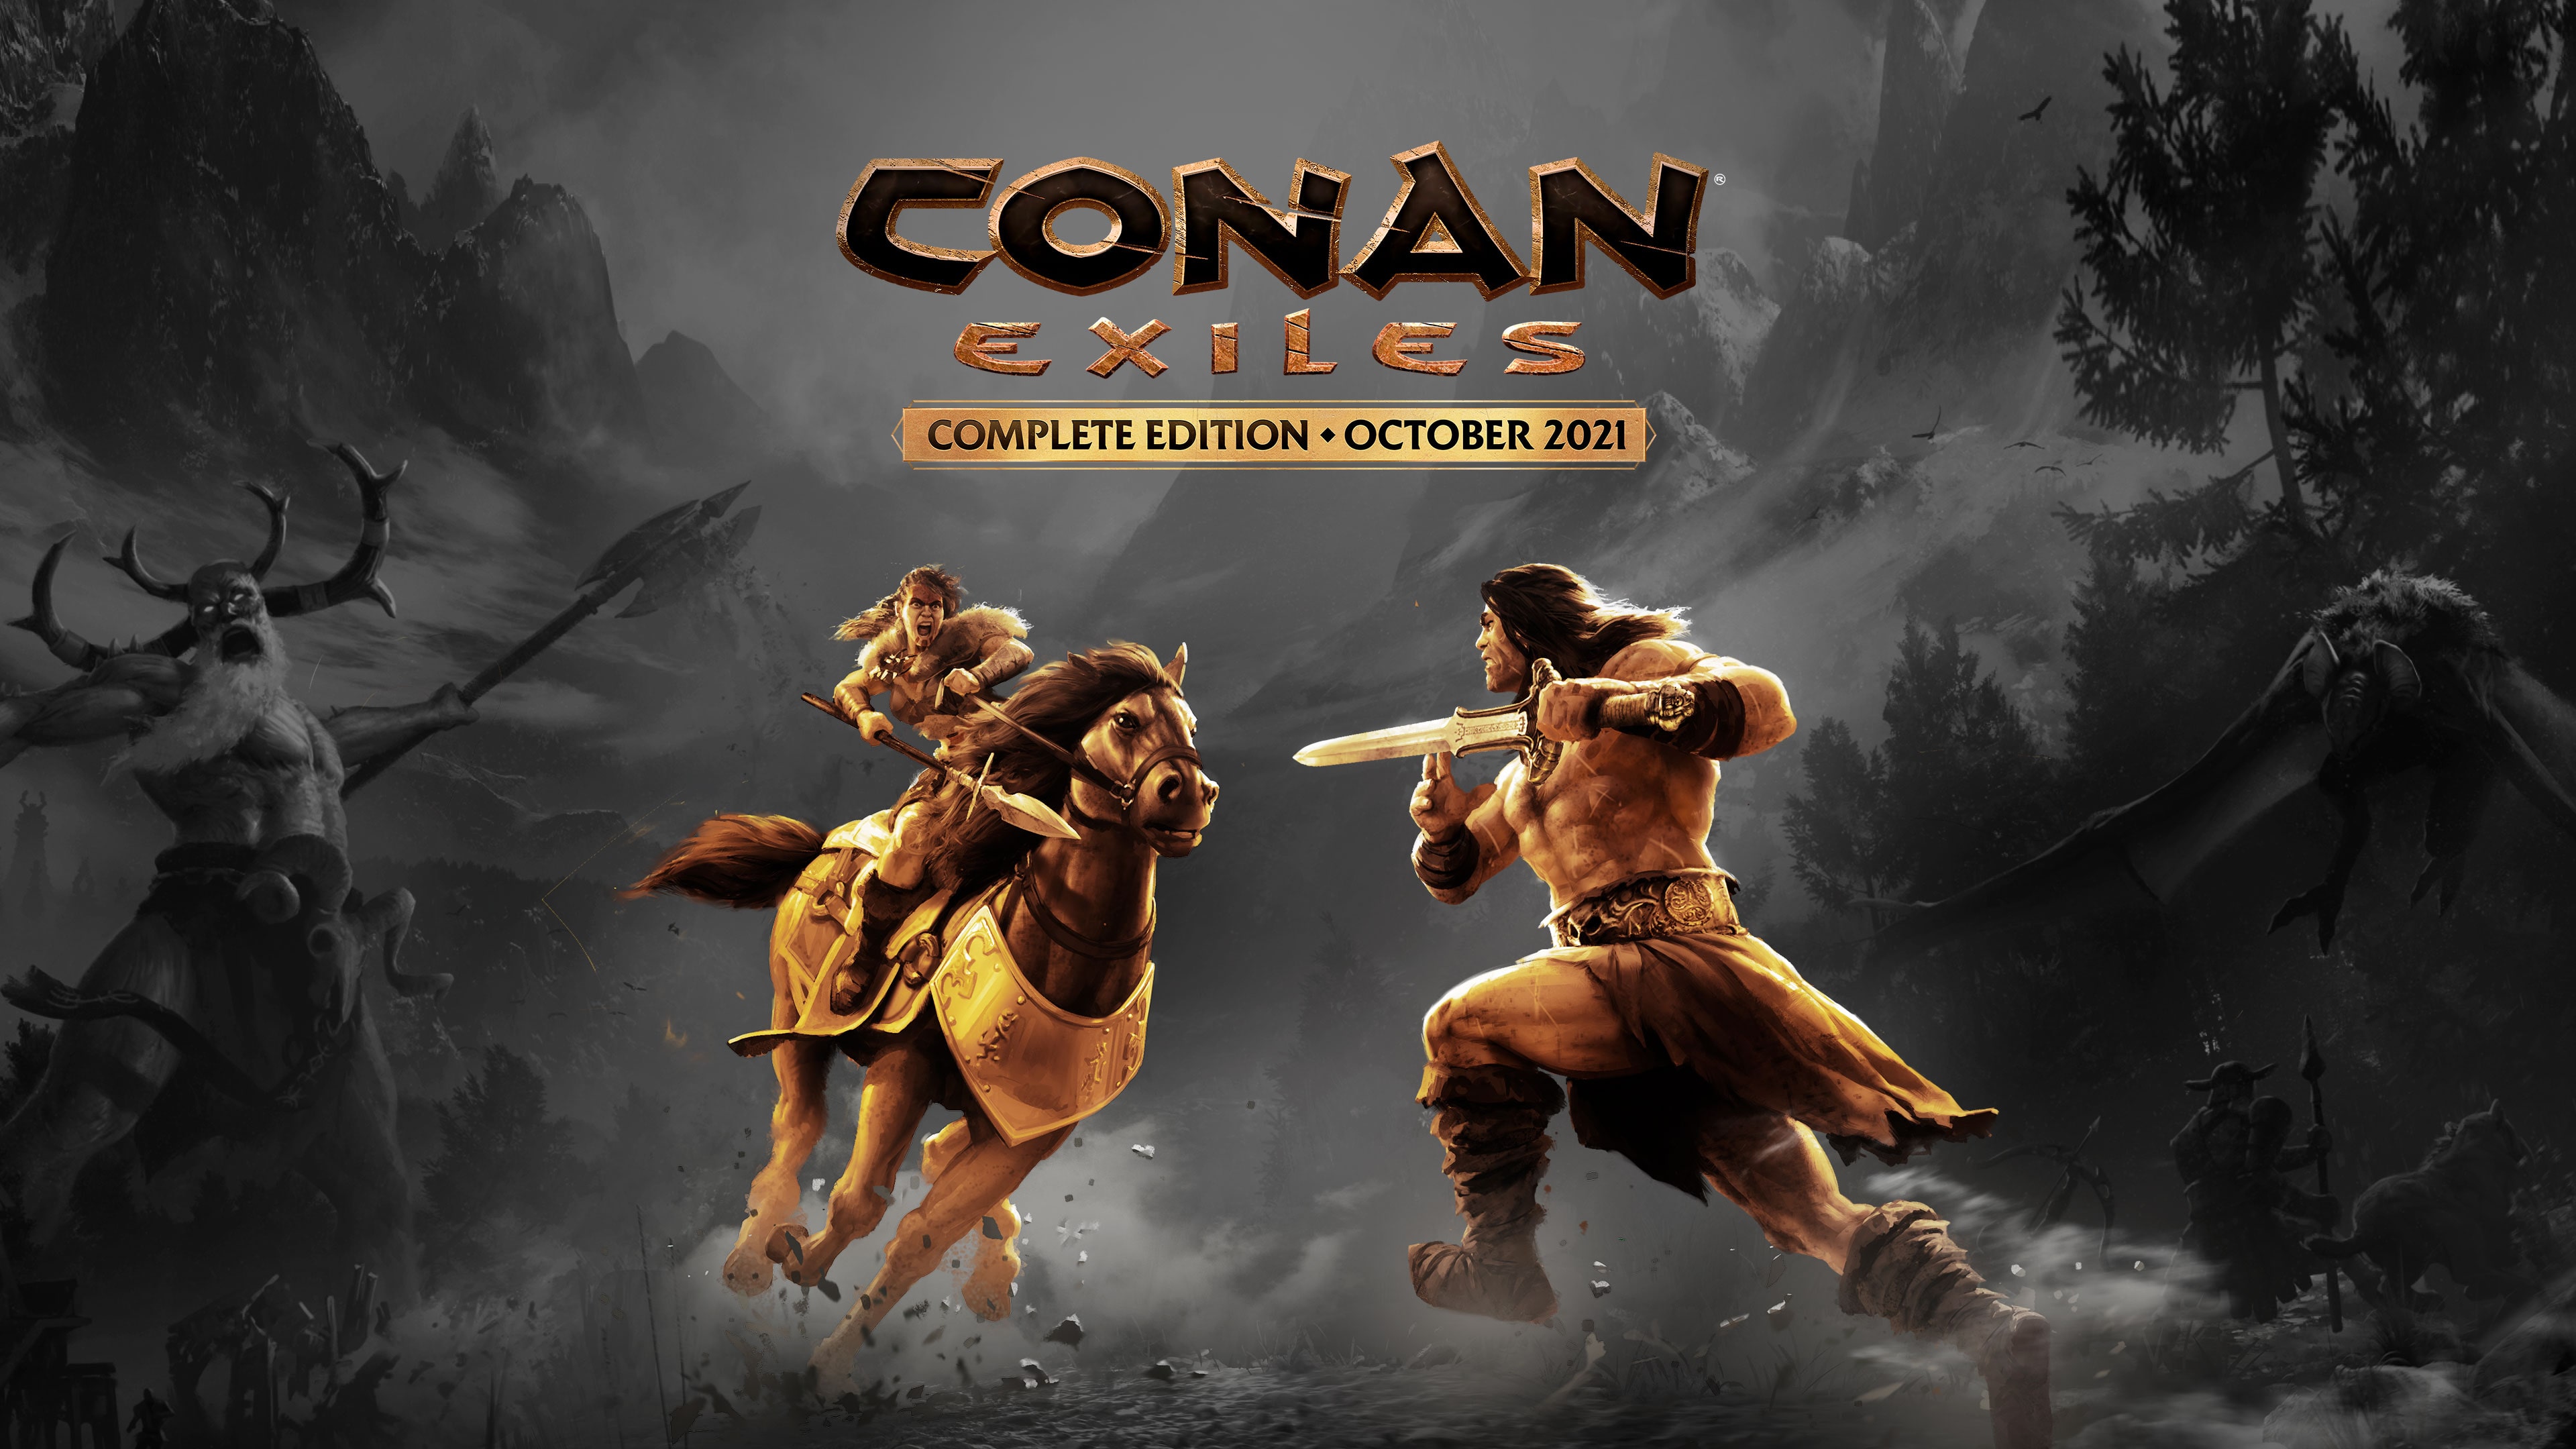 Conan Exiles - Complete Edition October 2021 (Simplified Chinese, English, Korean)